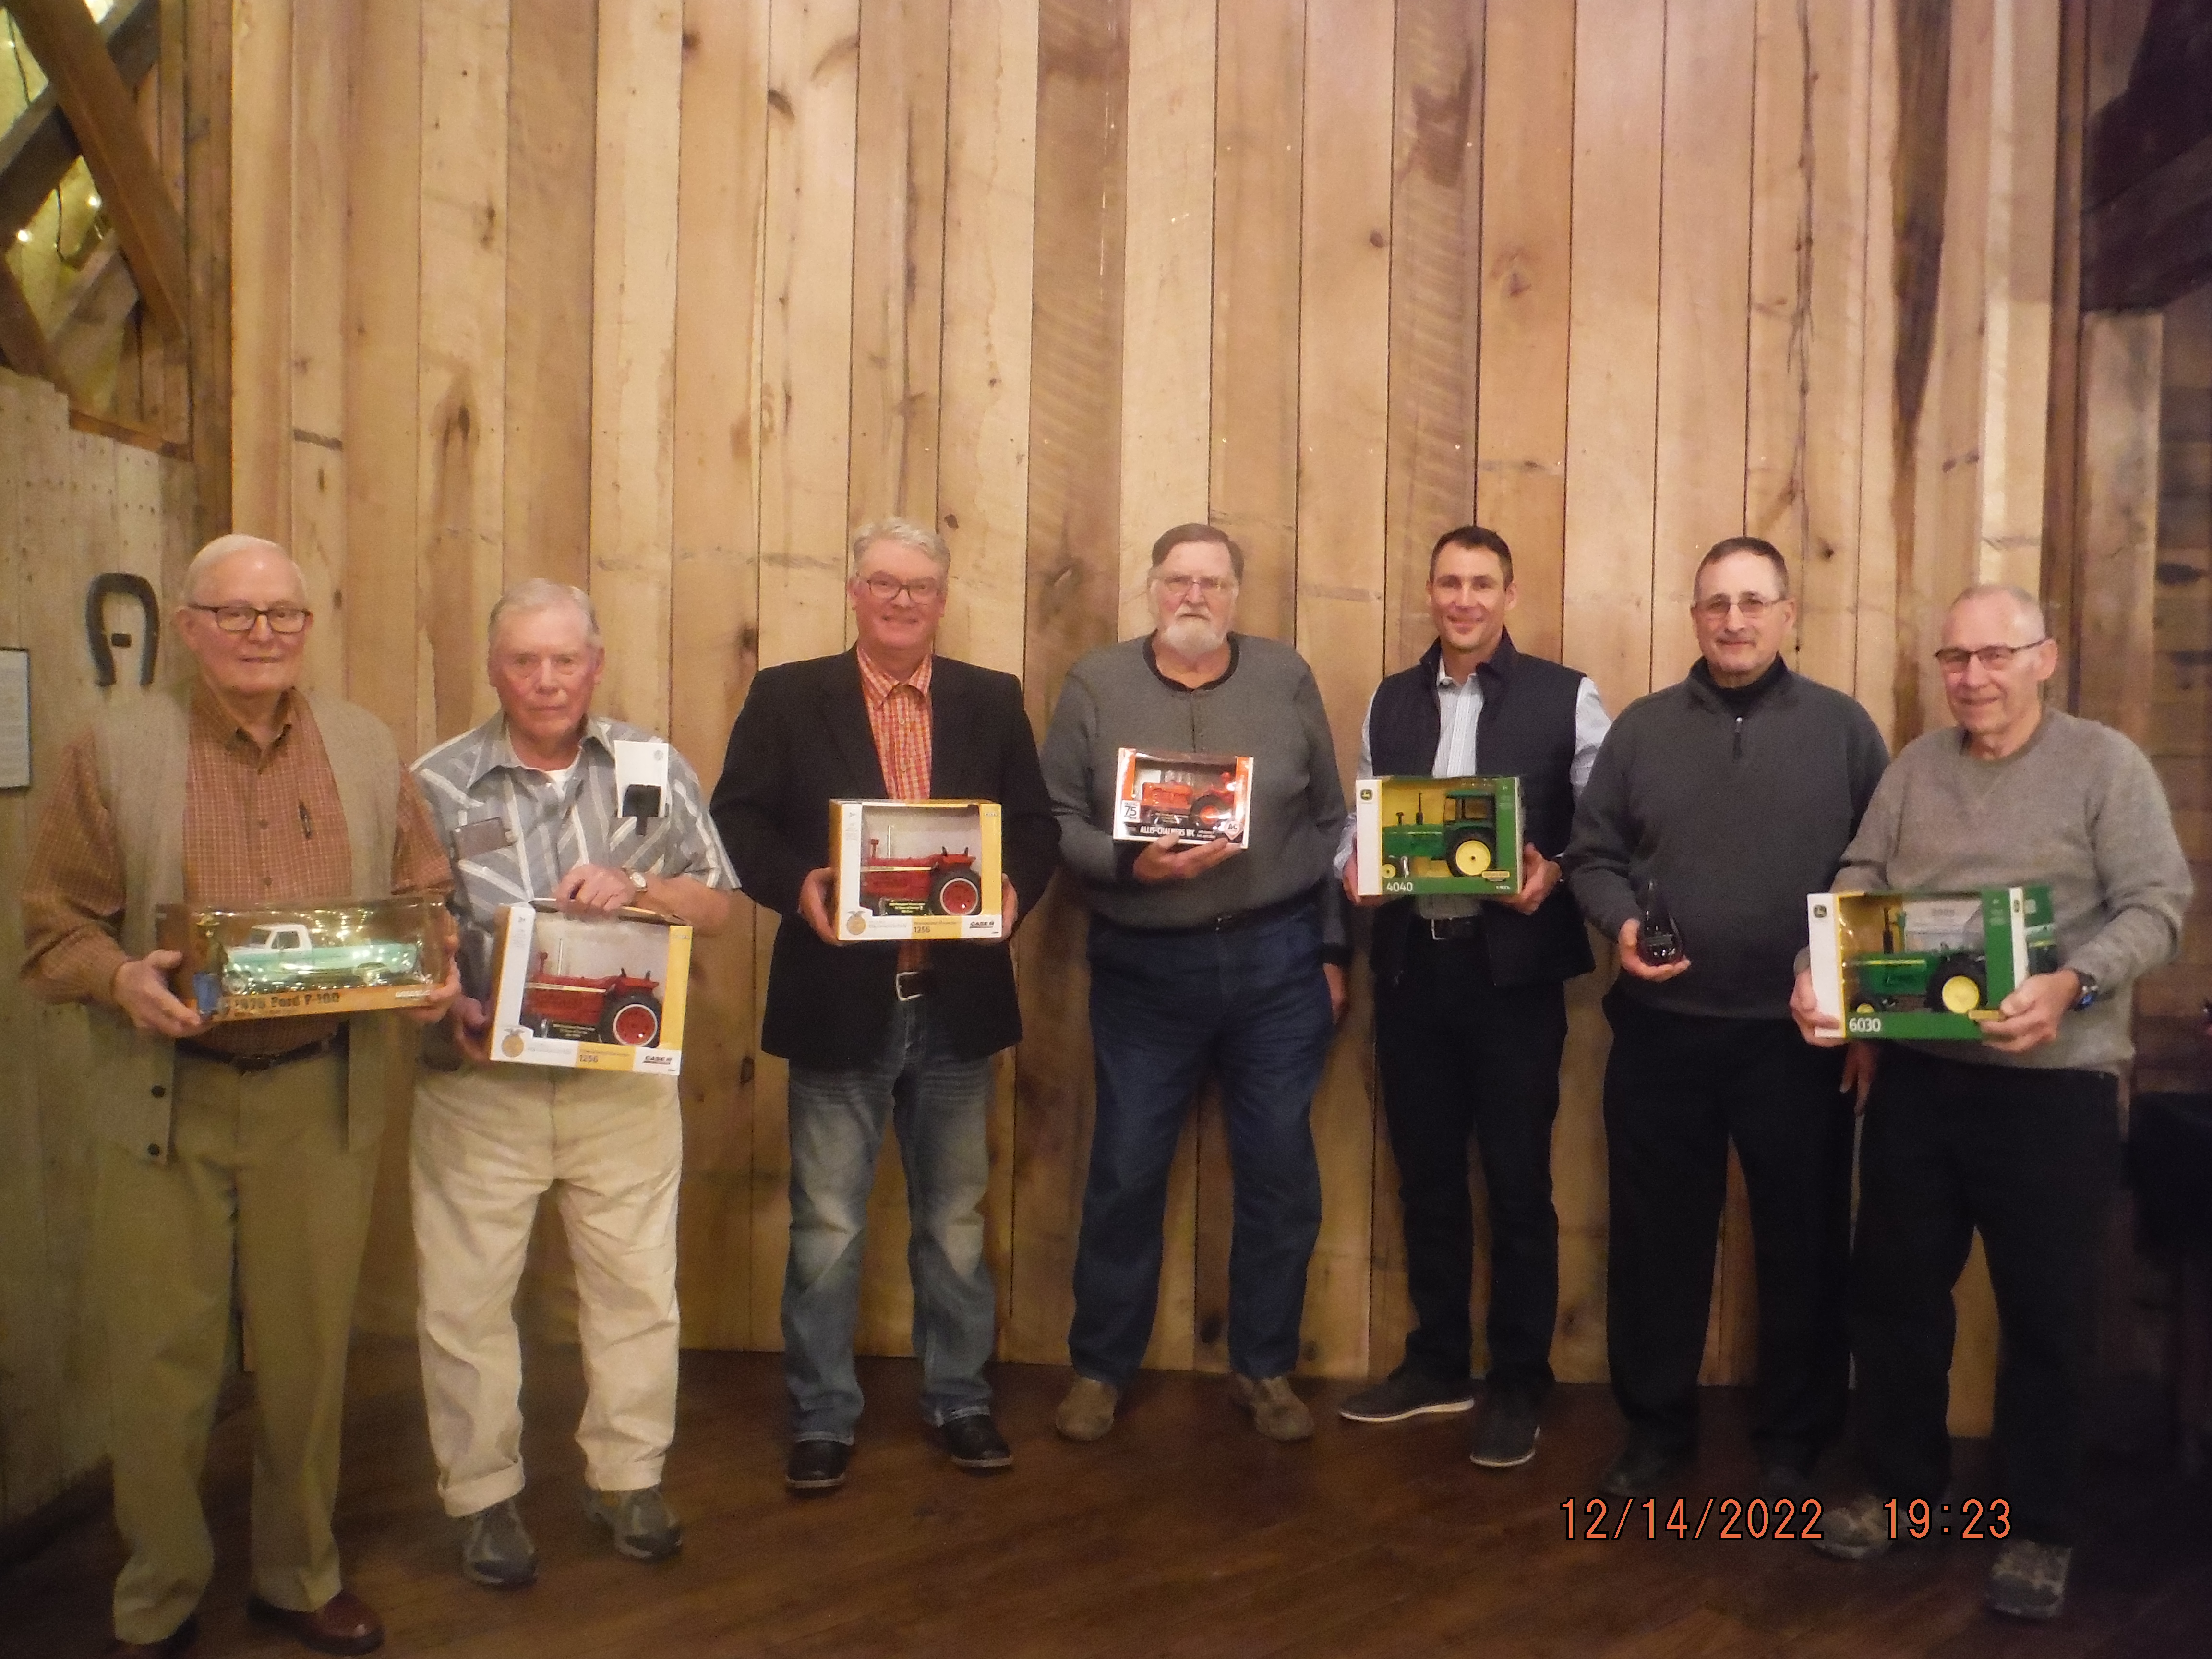 William Wentzel, Jim Willis, Bill Cree III, Dave Shipman, Greg Hopkins, Dominick Barbetta and Rick Thistlthwaite were presented Service Awards at the Greene County Conservation DistrictÃ¢â‚¬â„¢s annual award ceremony on Wednesday, Dec. 14.